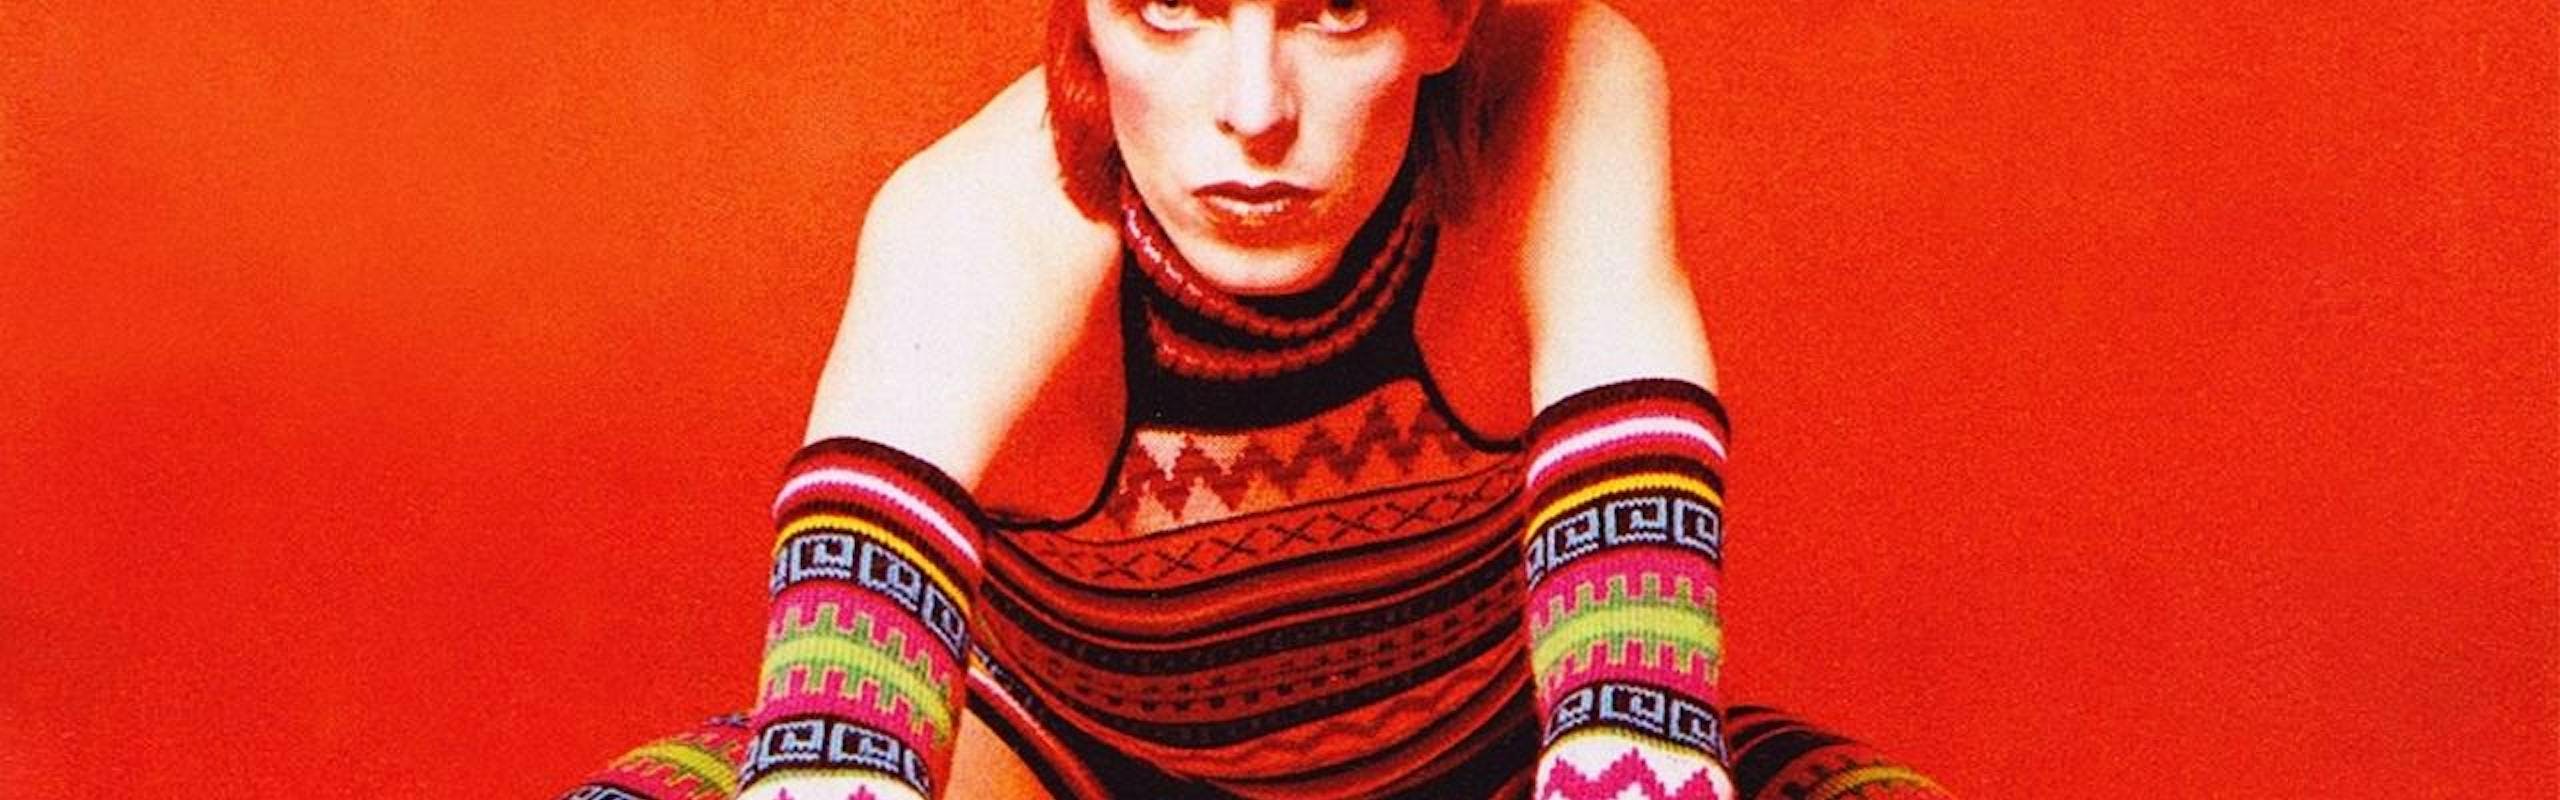 David Bowie in a yarn outfit